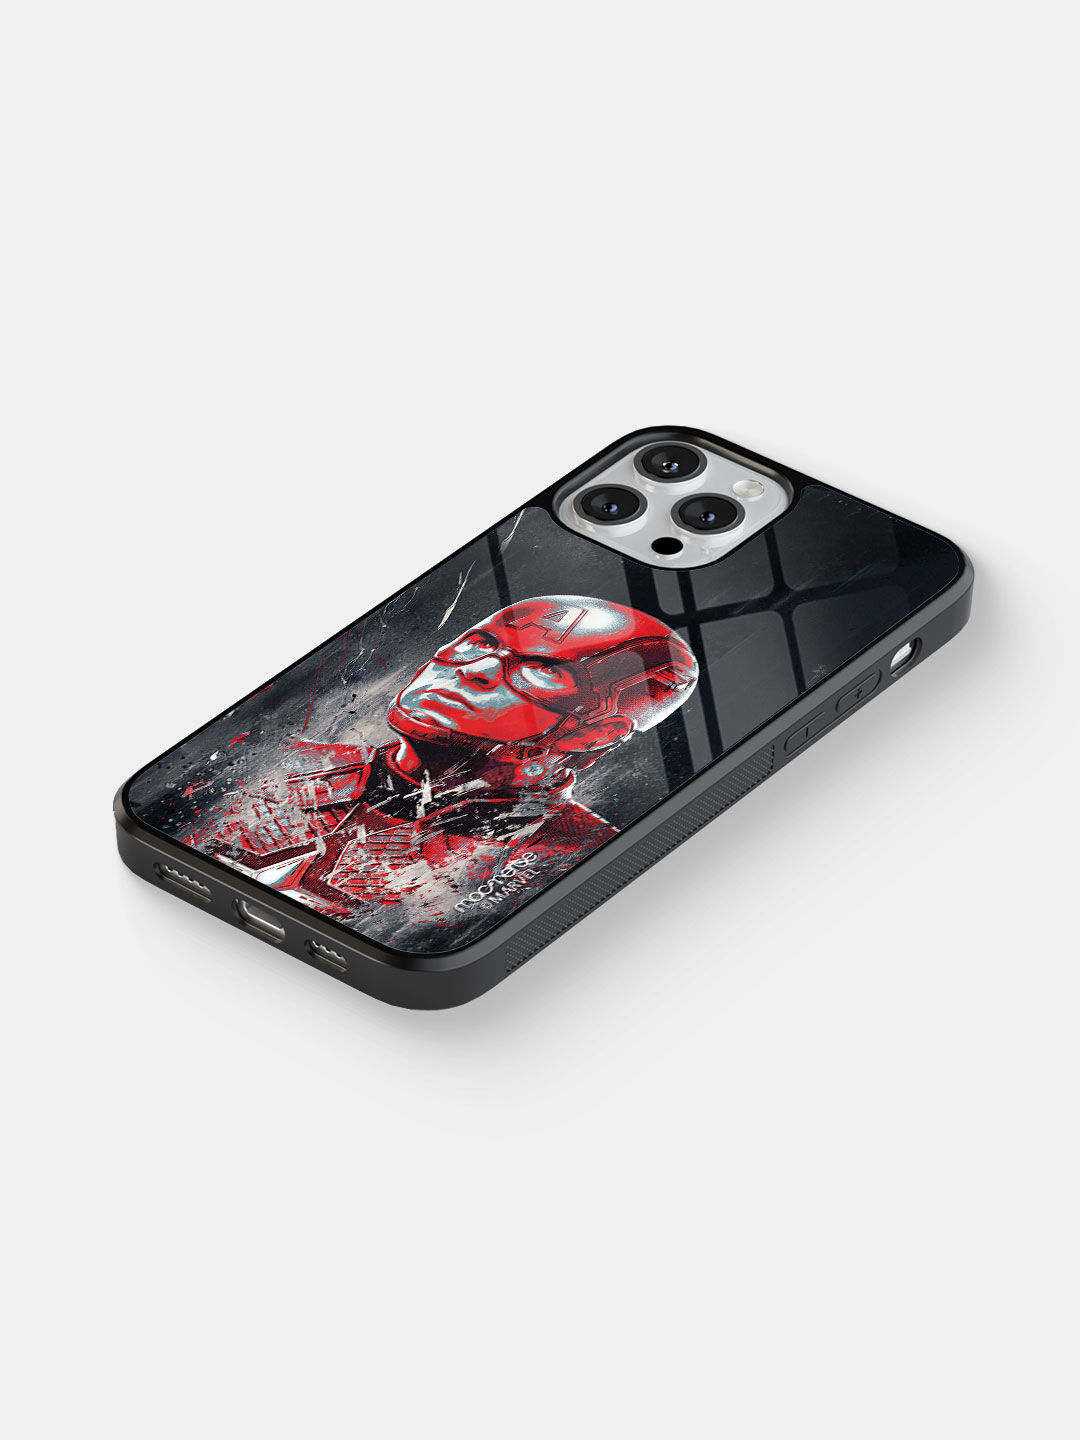 Charcoal Art Captain America - Glass Case For iPhone 13 Pro Max